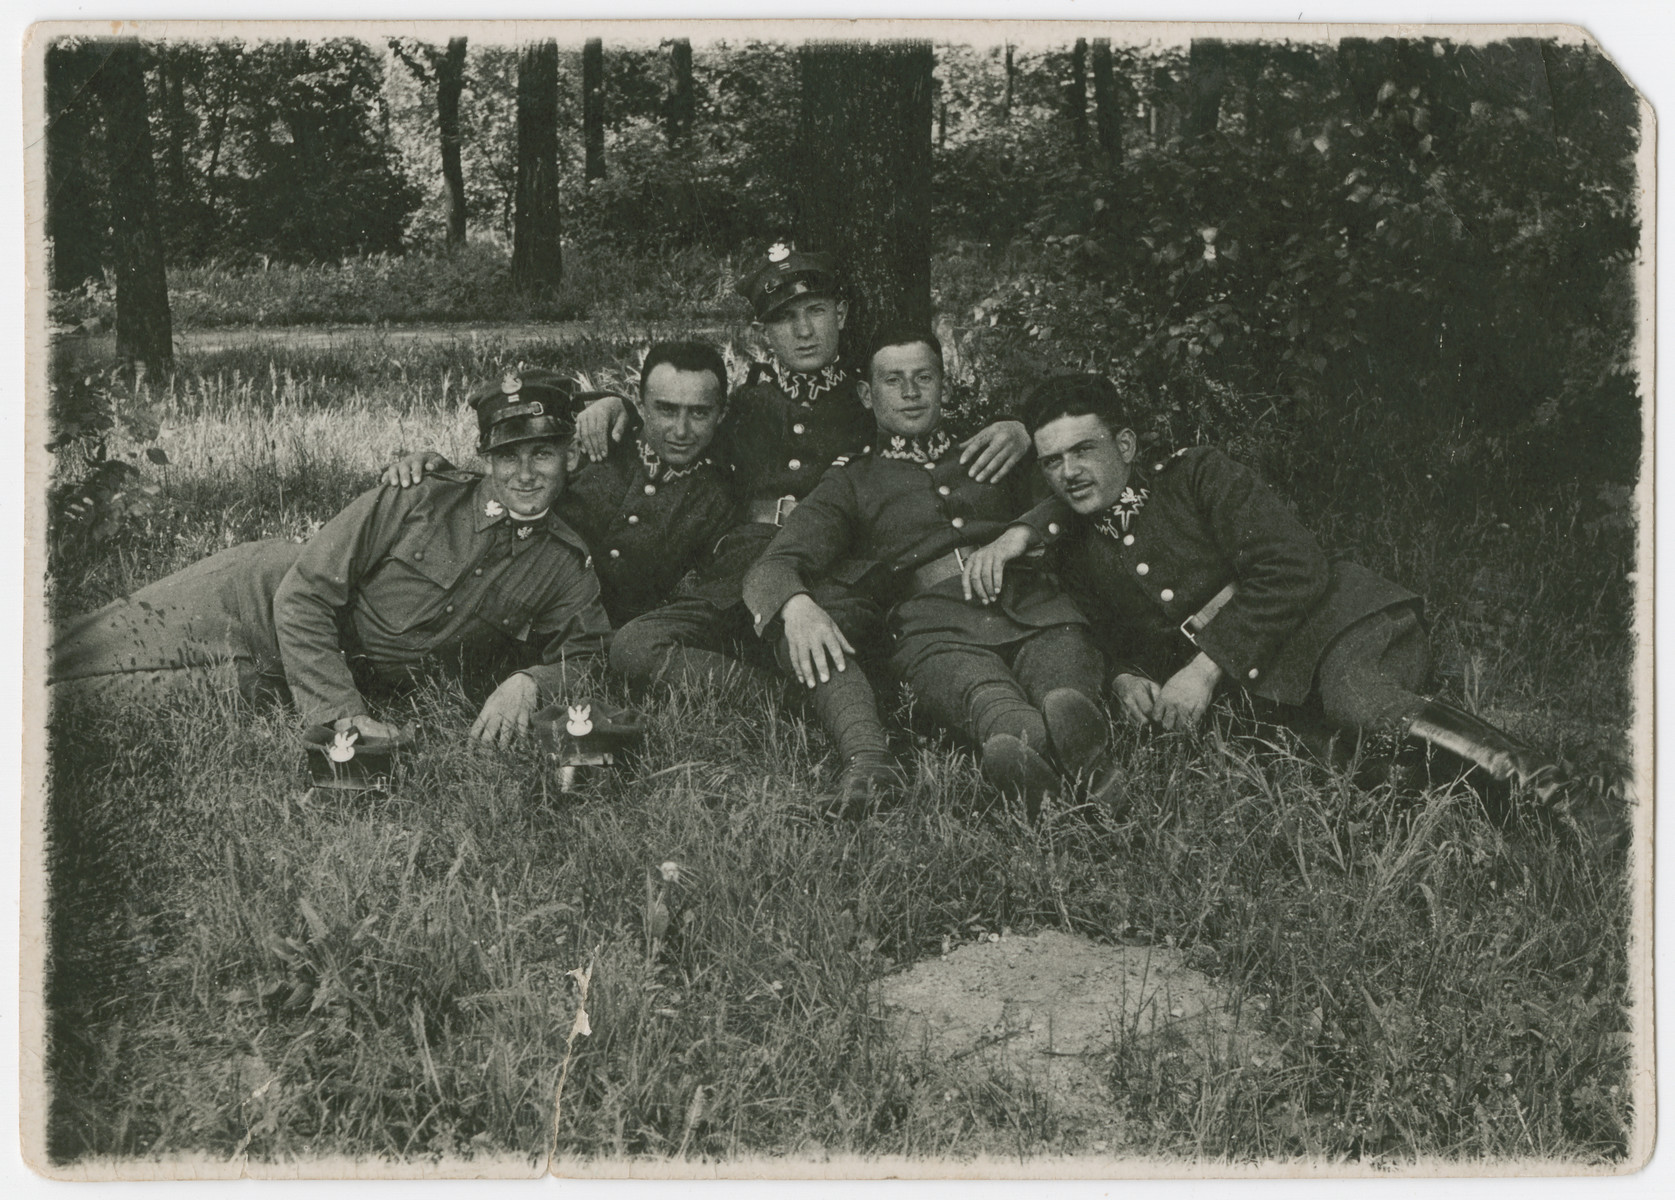 A group of Polish soliders relaxes under a tree.

Lt. Yehuda Bielski is pictured on the far left in his summer uniform.